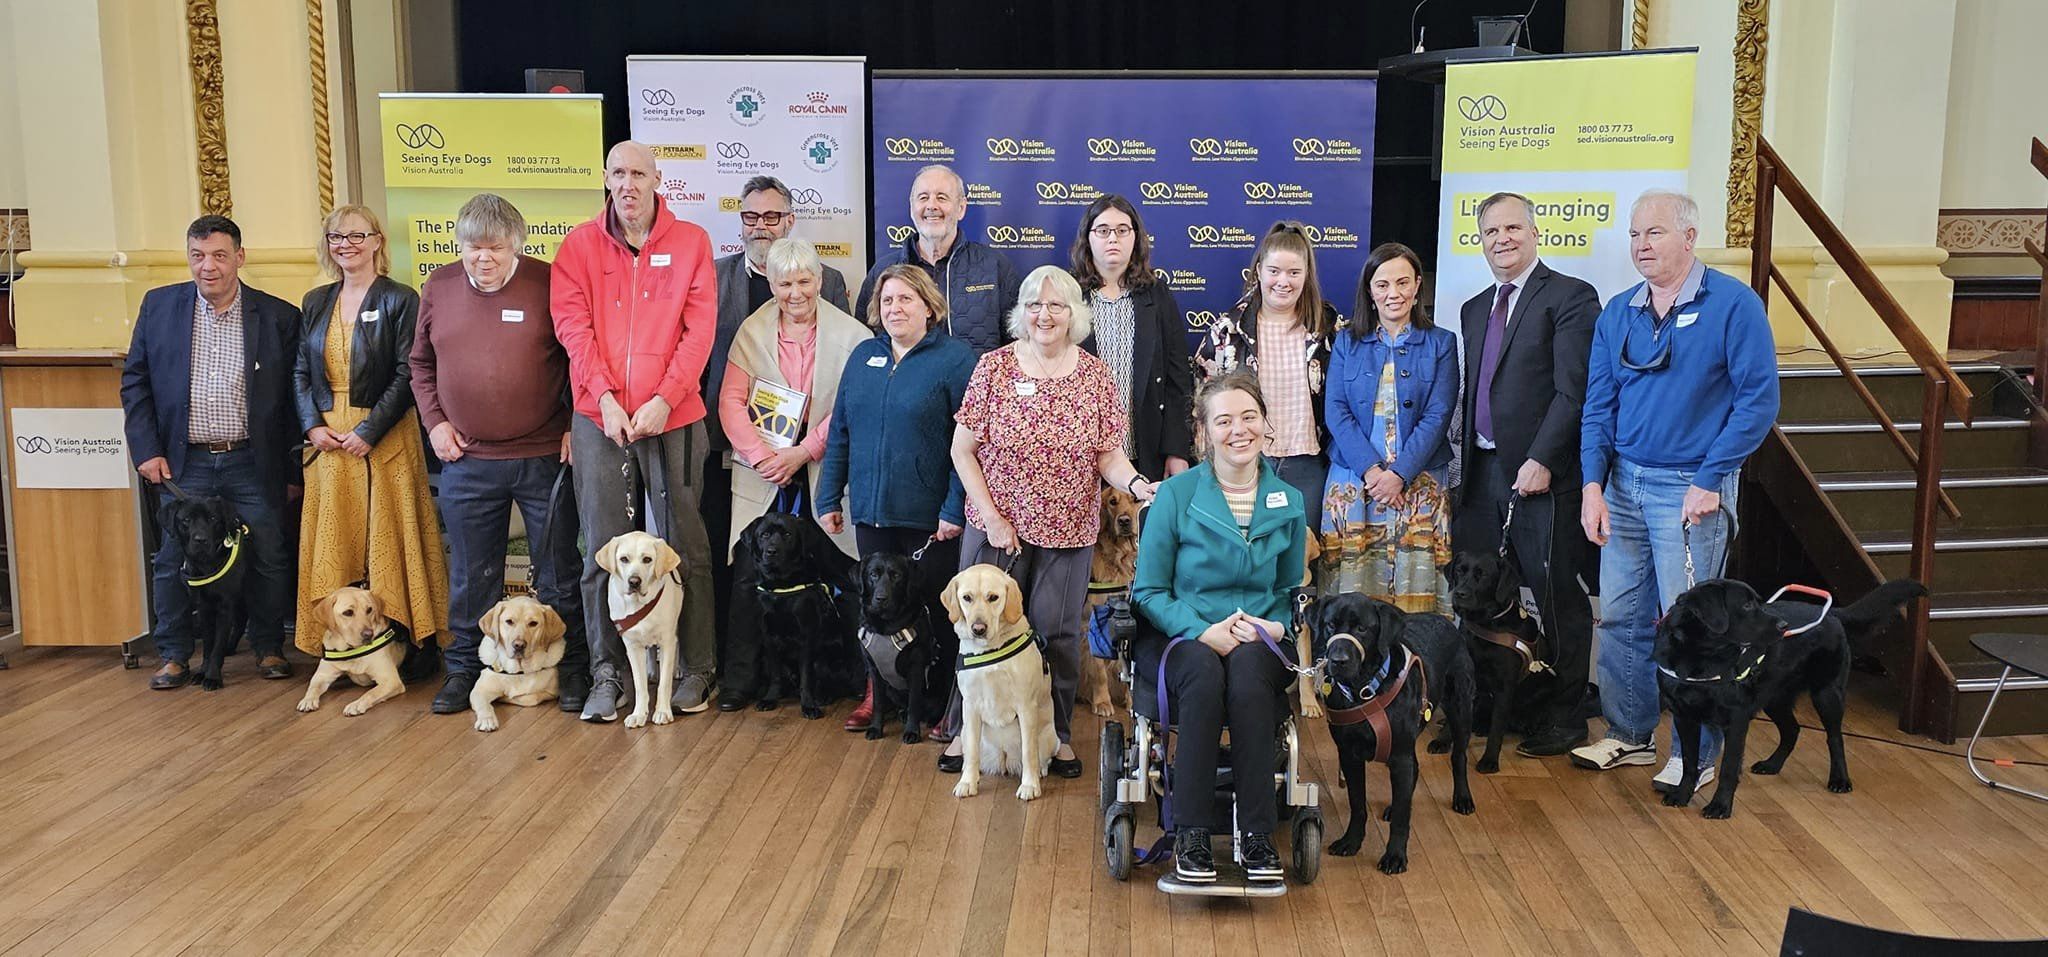 "A group of people and Seeing Eye Dogs stand in front of a stage"